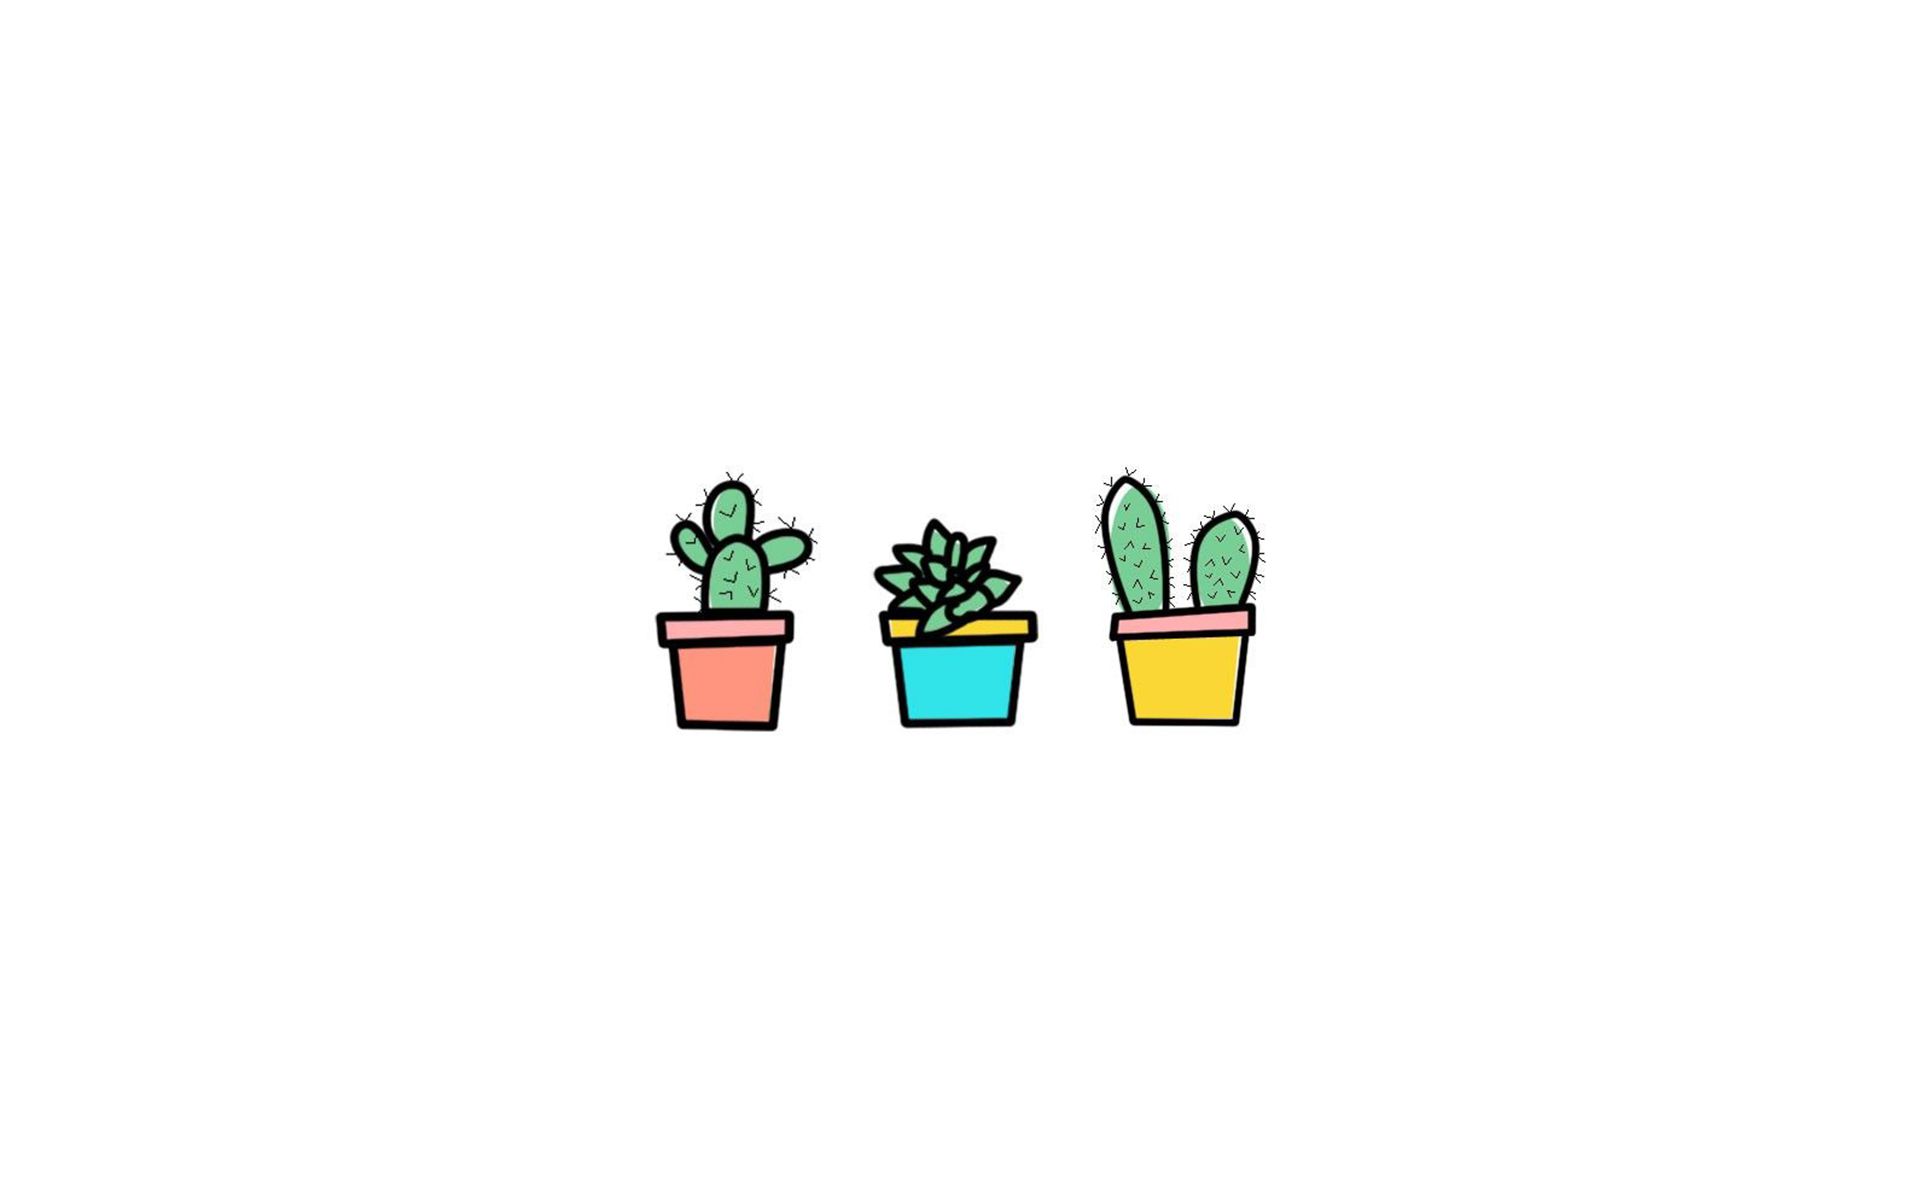 A simple yet cute wallpaper of three cacti - Cactus